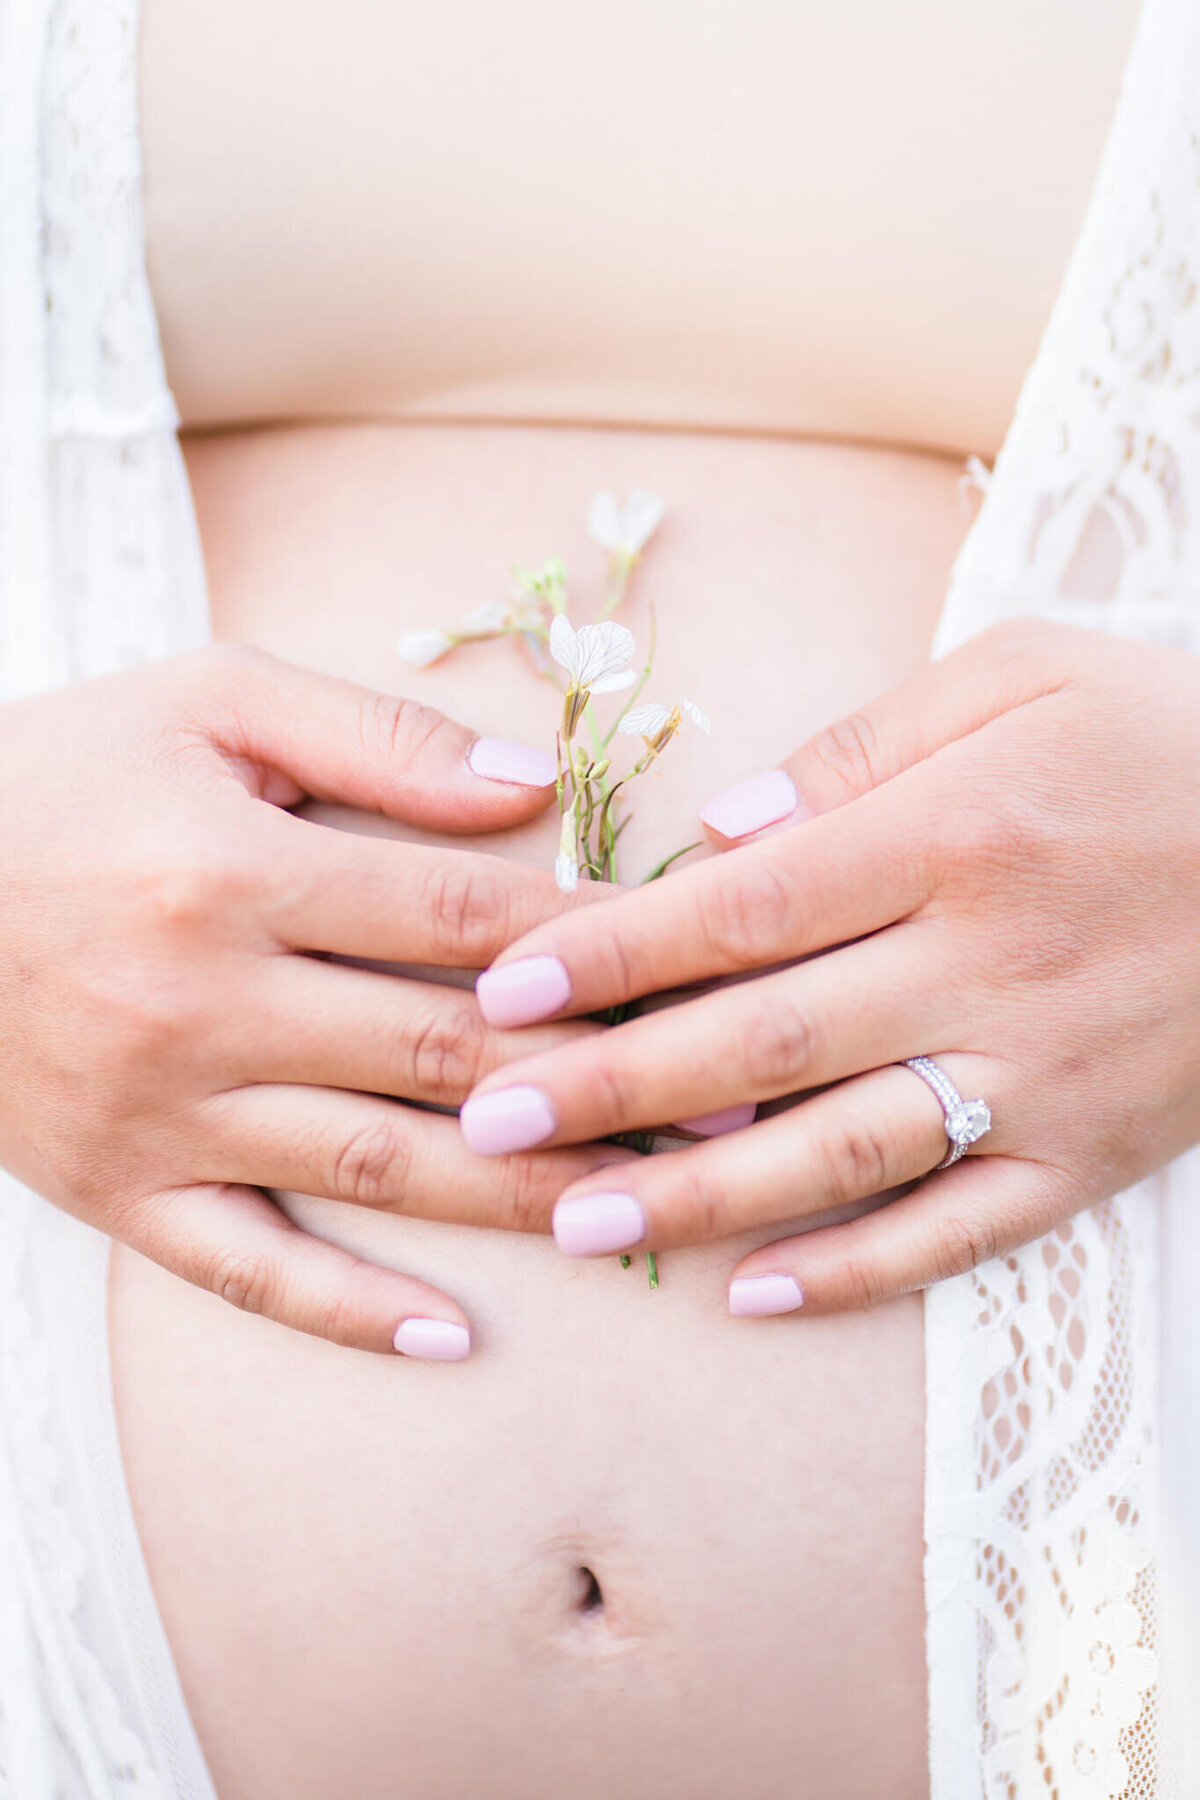 Bare exposed pregnant belly with lace coverup with hand holding flowers